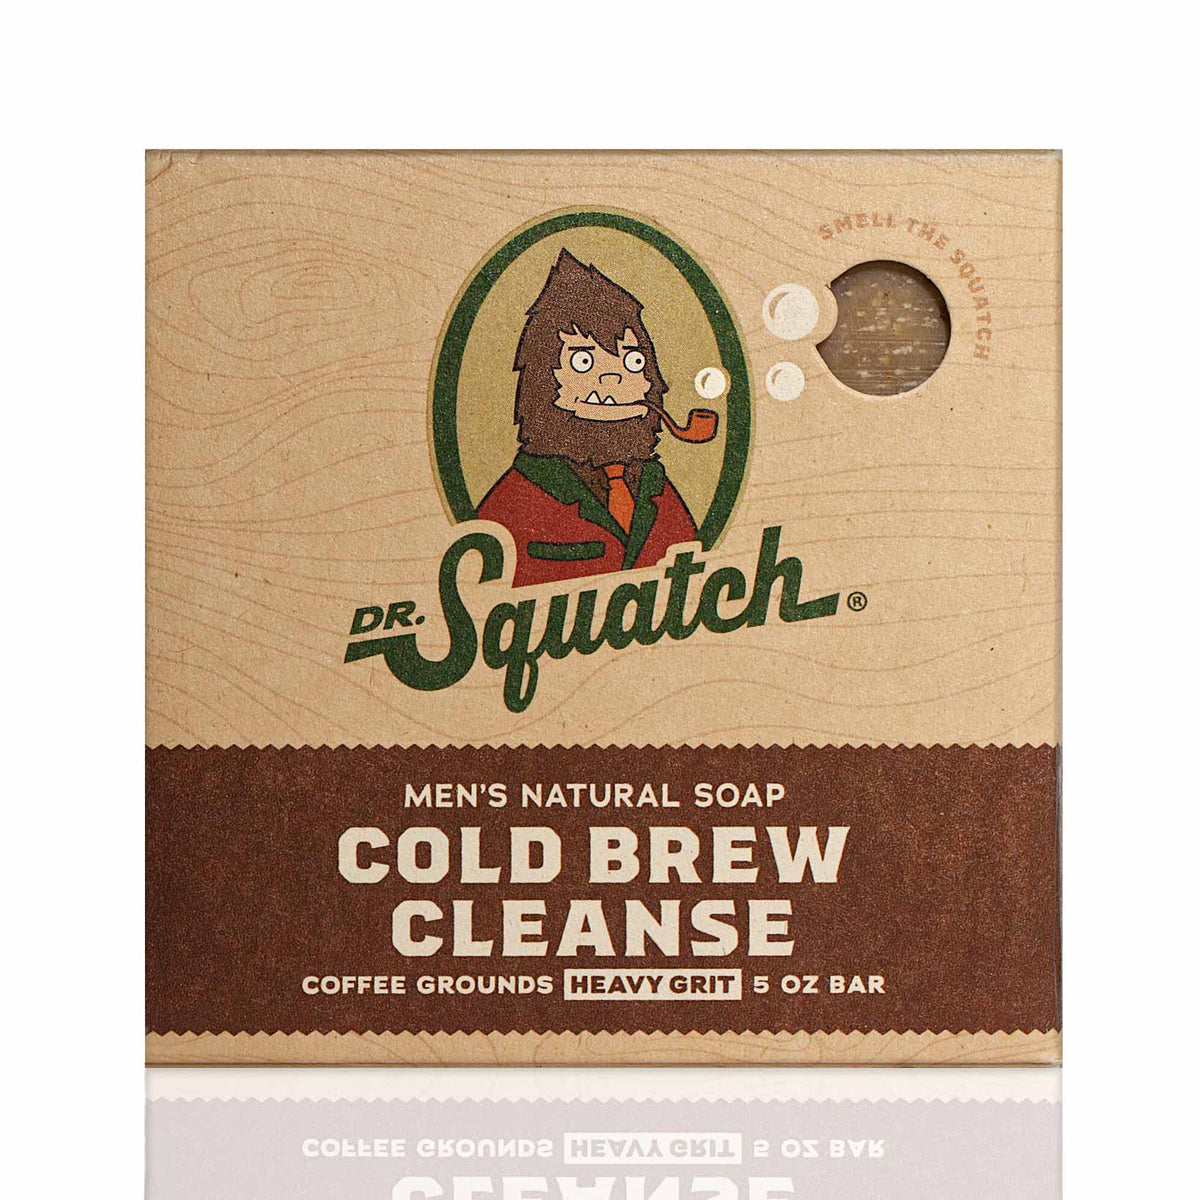 2-Pack of Dr Squatch Frosty Peppermint Mens Natural Limited Edition Bar Soap